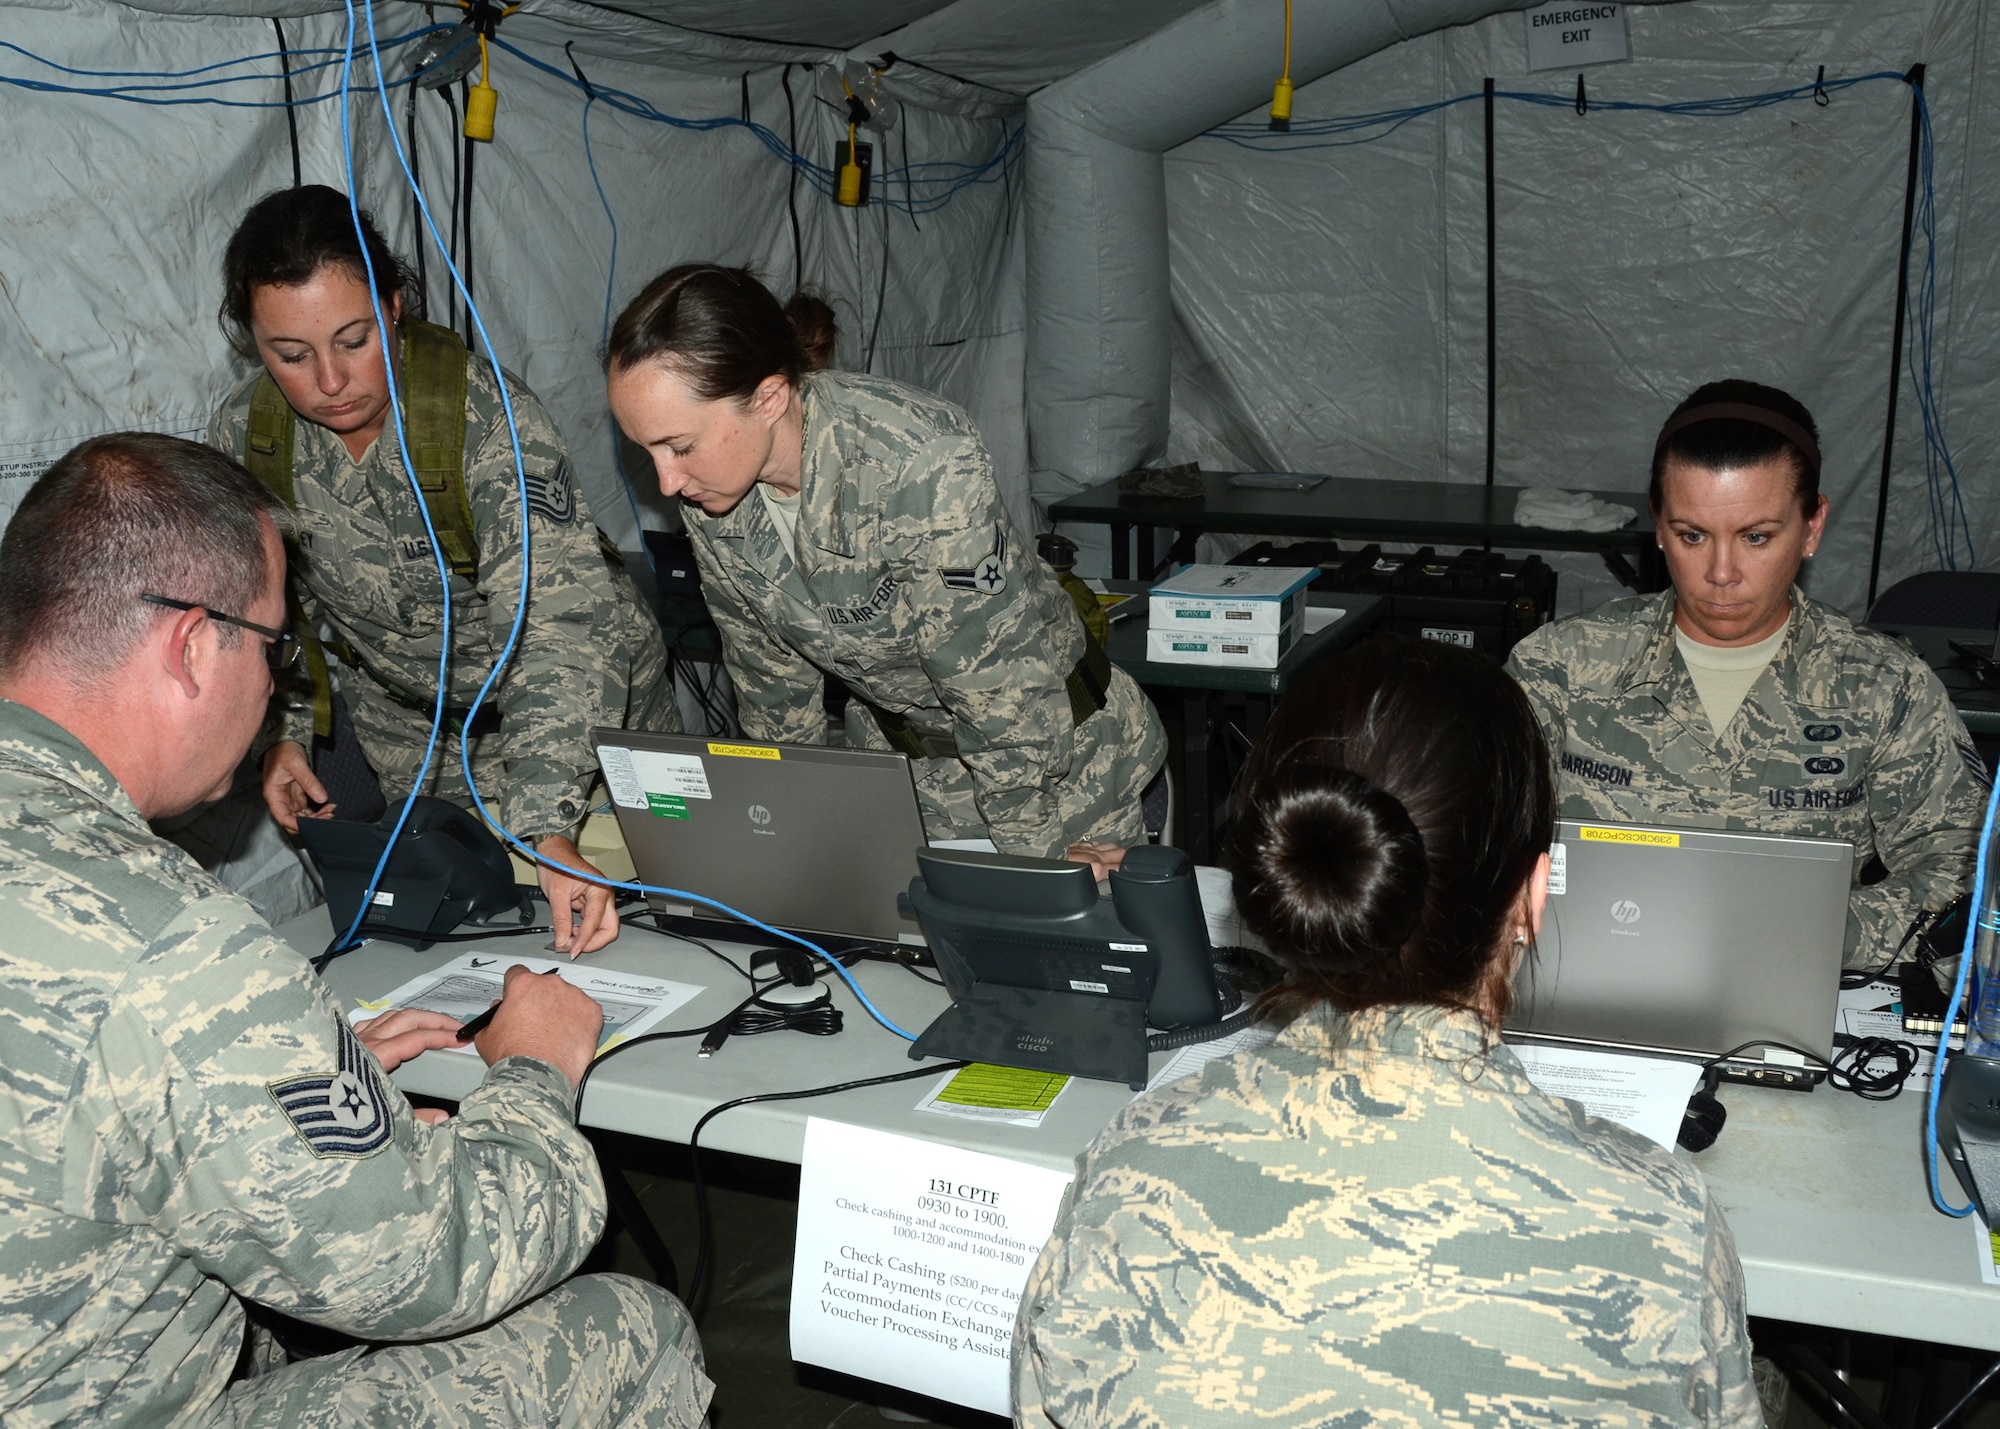 The 239th Combat Communications Squadron, Missouri Air National Guard, “deployed” from Jefferson Barracks, St. Louis, Missouri, to Whiteman Air Force Base, Missouri, for an exercise during the 131st Bomb Wing annual training week, June 16-20, 2014.   Citizen-Airmen of the 131st Bomb Wing Comptroller Flight also participated in the exercise, with members running mock scenarios while using equipment and workspace provided by the 239th. (U.S. Air National Guard photo by Airman Halley Burgess)